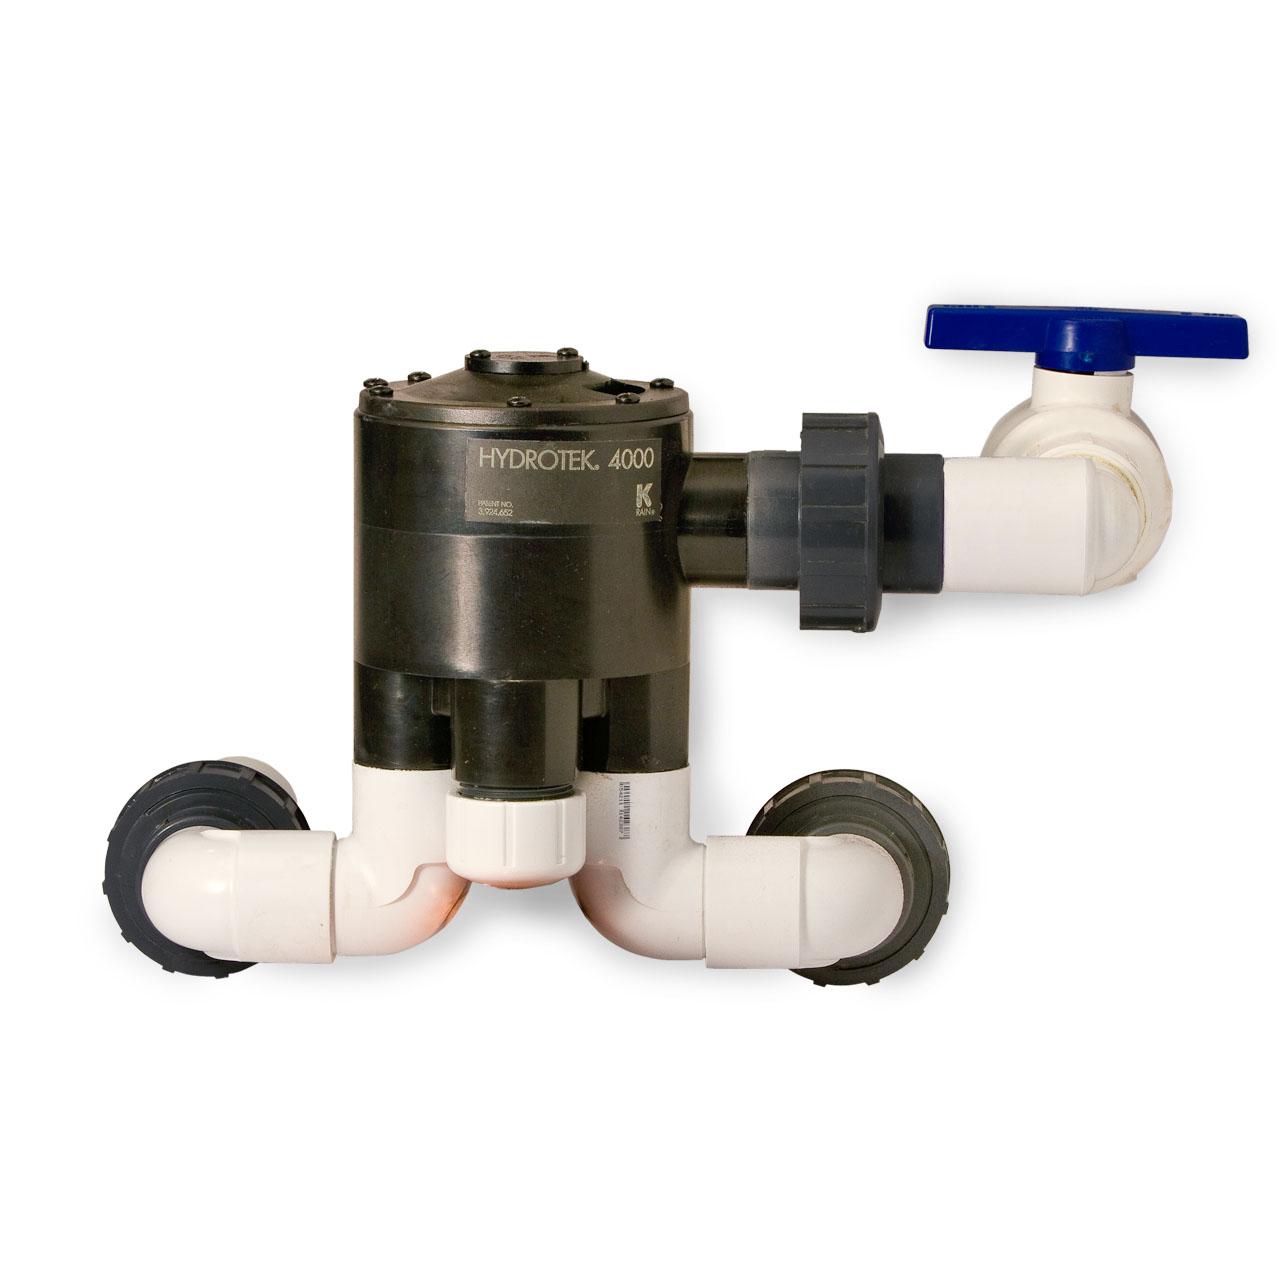 maatschappij slachtoffers Permanent Orenco Systems, Inc. - Orenco V4605A Automatic Distributing Valve 1.25"  Inlet & Outlets 10-40 GPM Flow Range 5 Zone #ONCV4605A